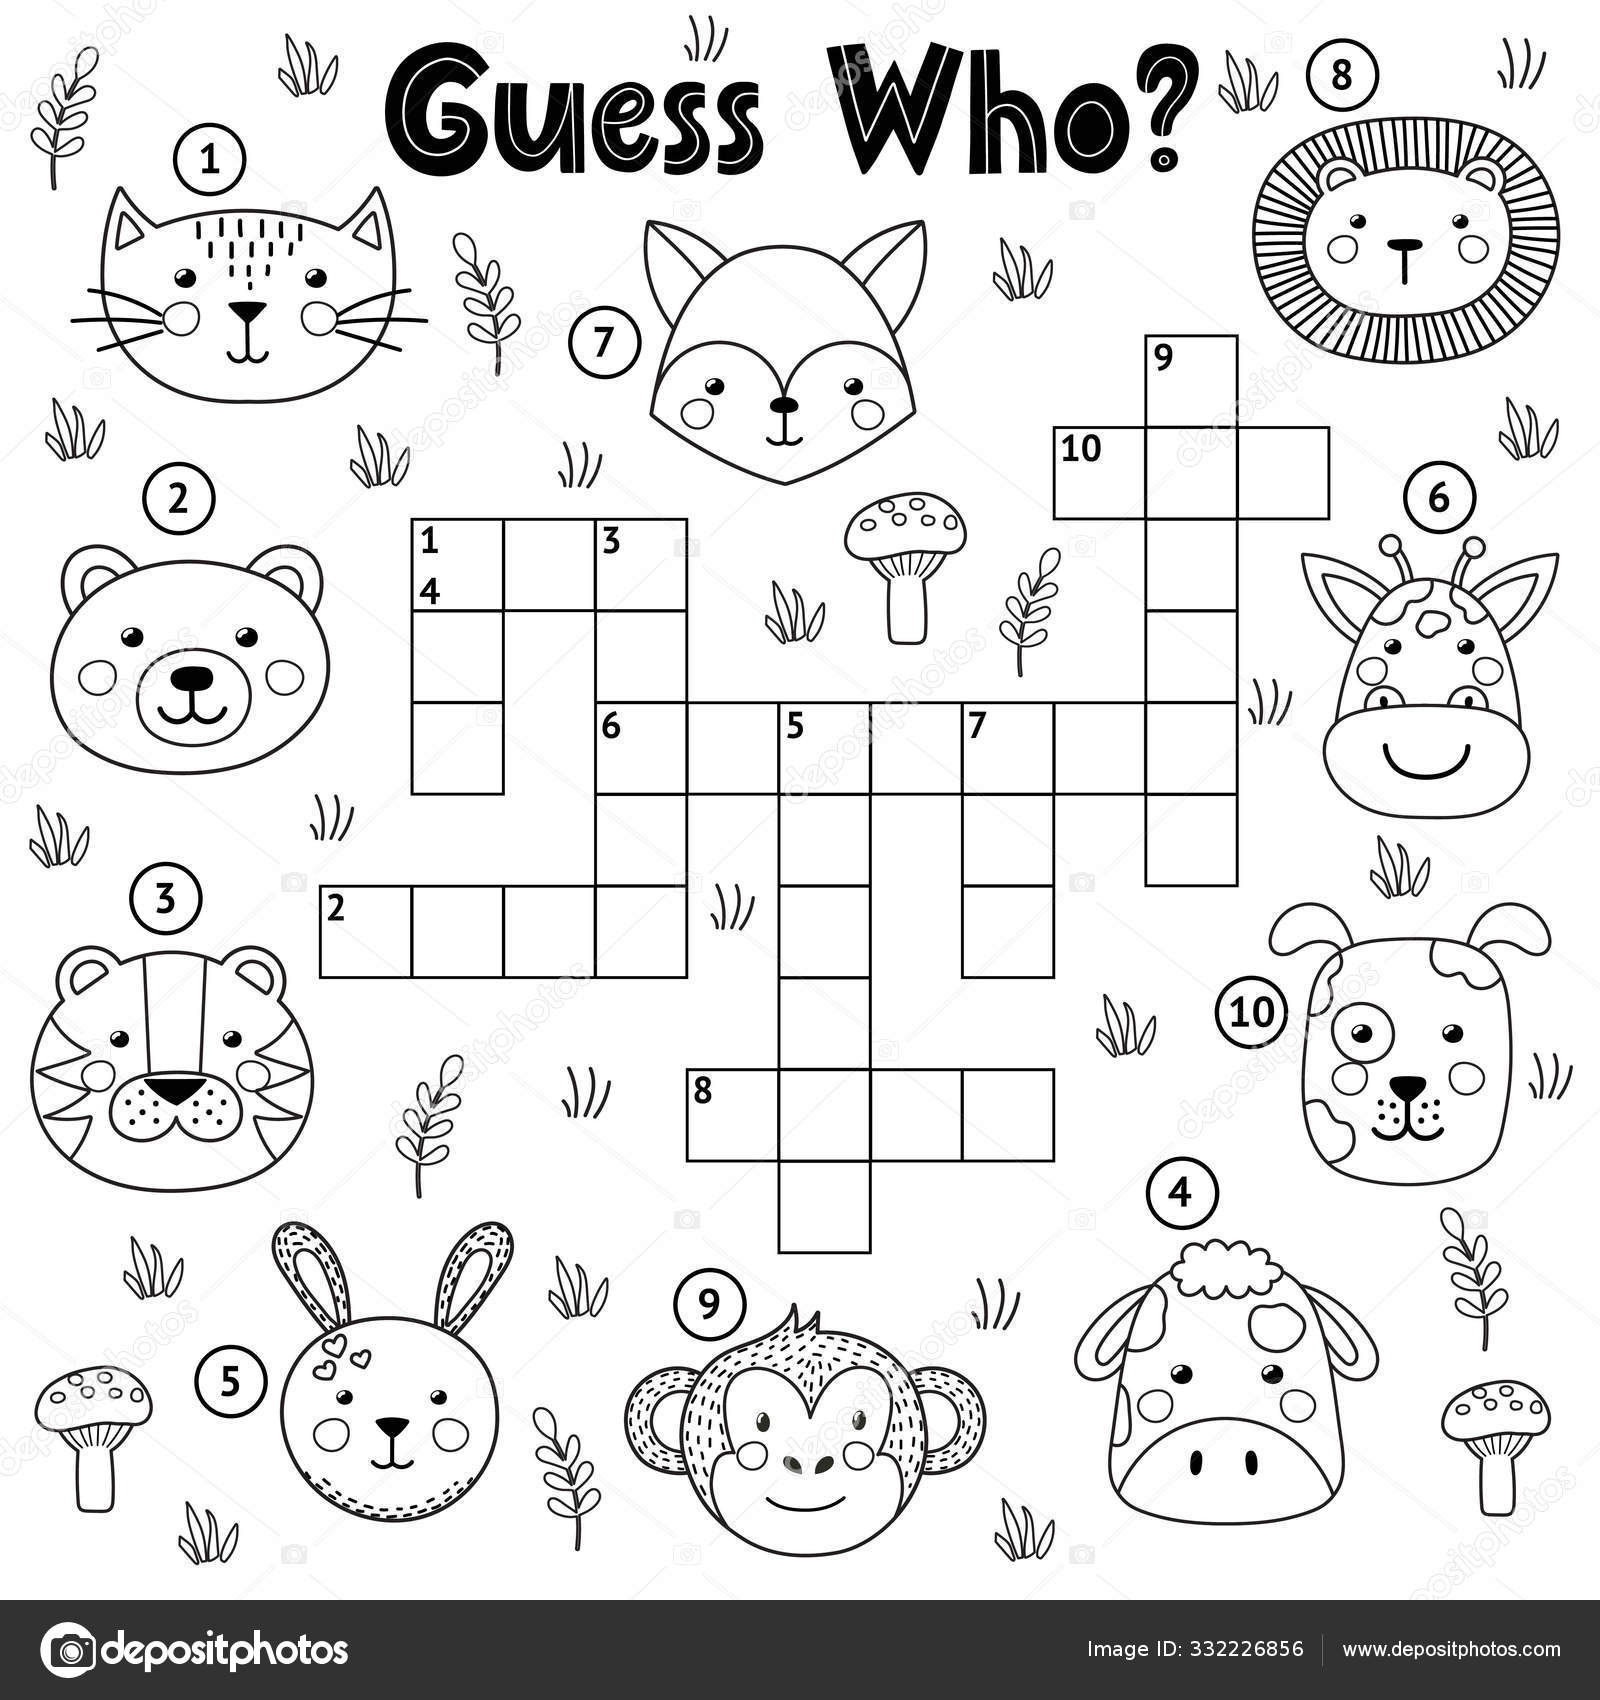 Guess who black and white crossword for kids stock vector by juliyas